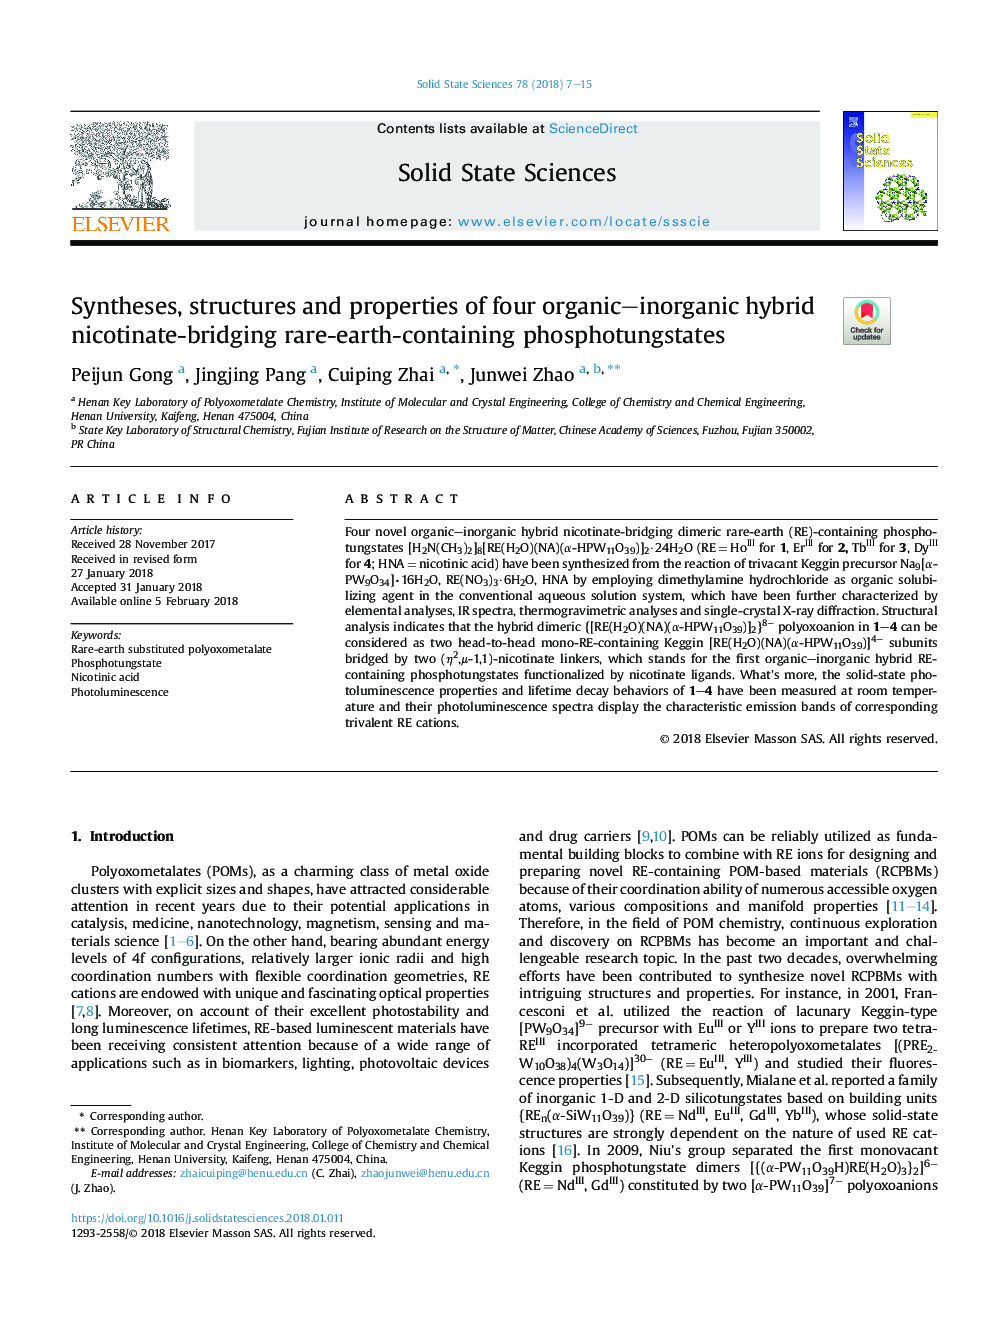 Syntheses, structures and properties of four organic-inorganic hybrid nicotinate-bridging rare-earth-containing phosphotungstates